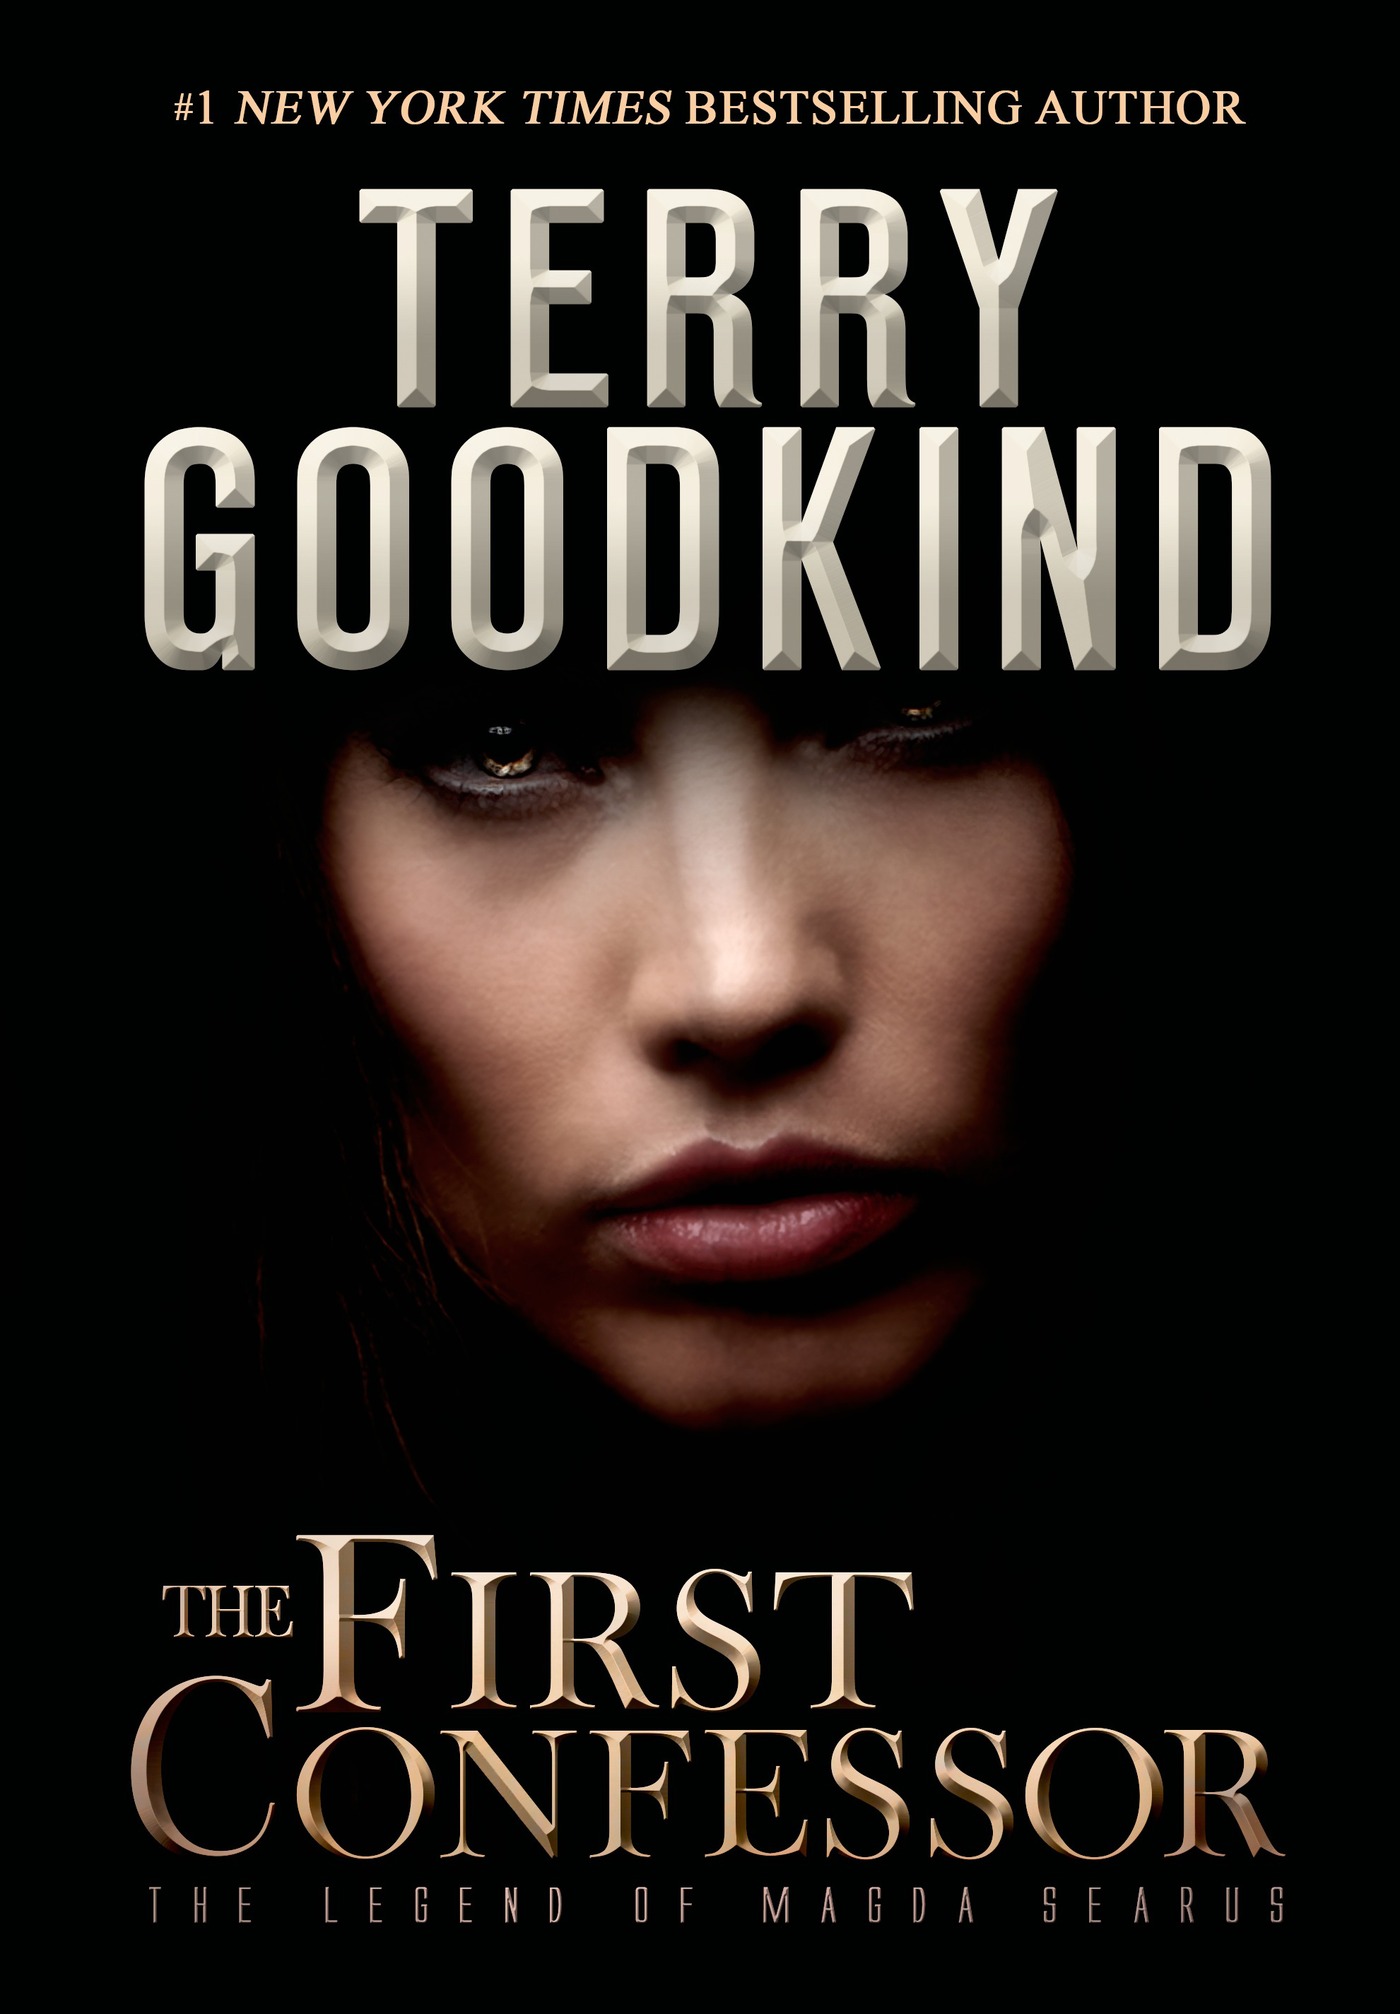 The First Confessor : The Legend of Magda Searus - A Sword of Truth Prequel by Terry Goodkind